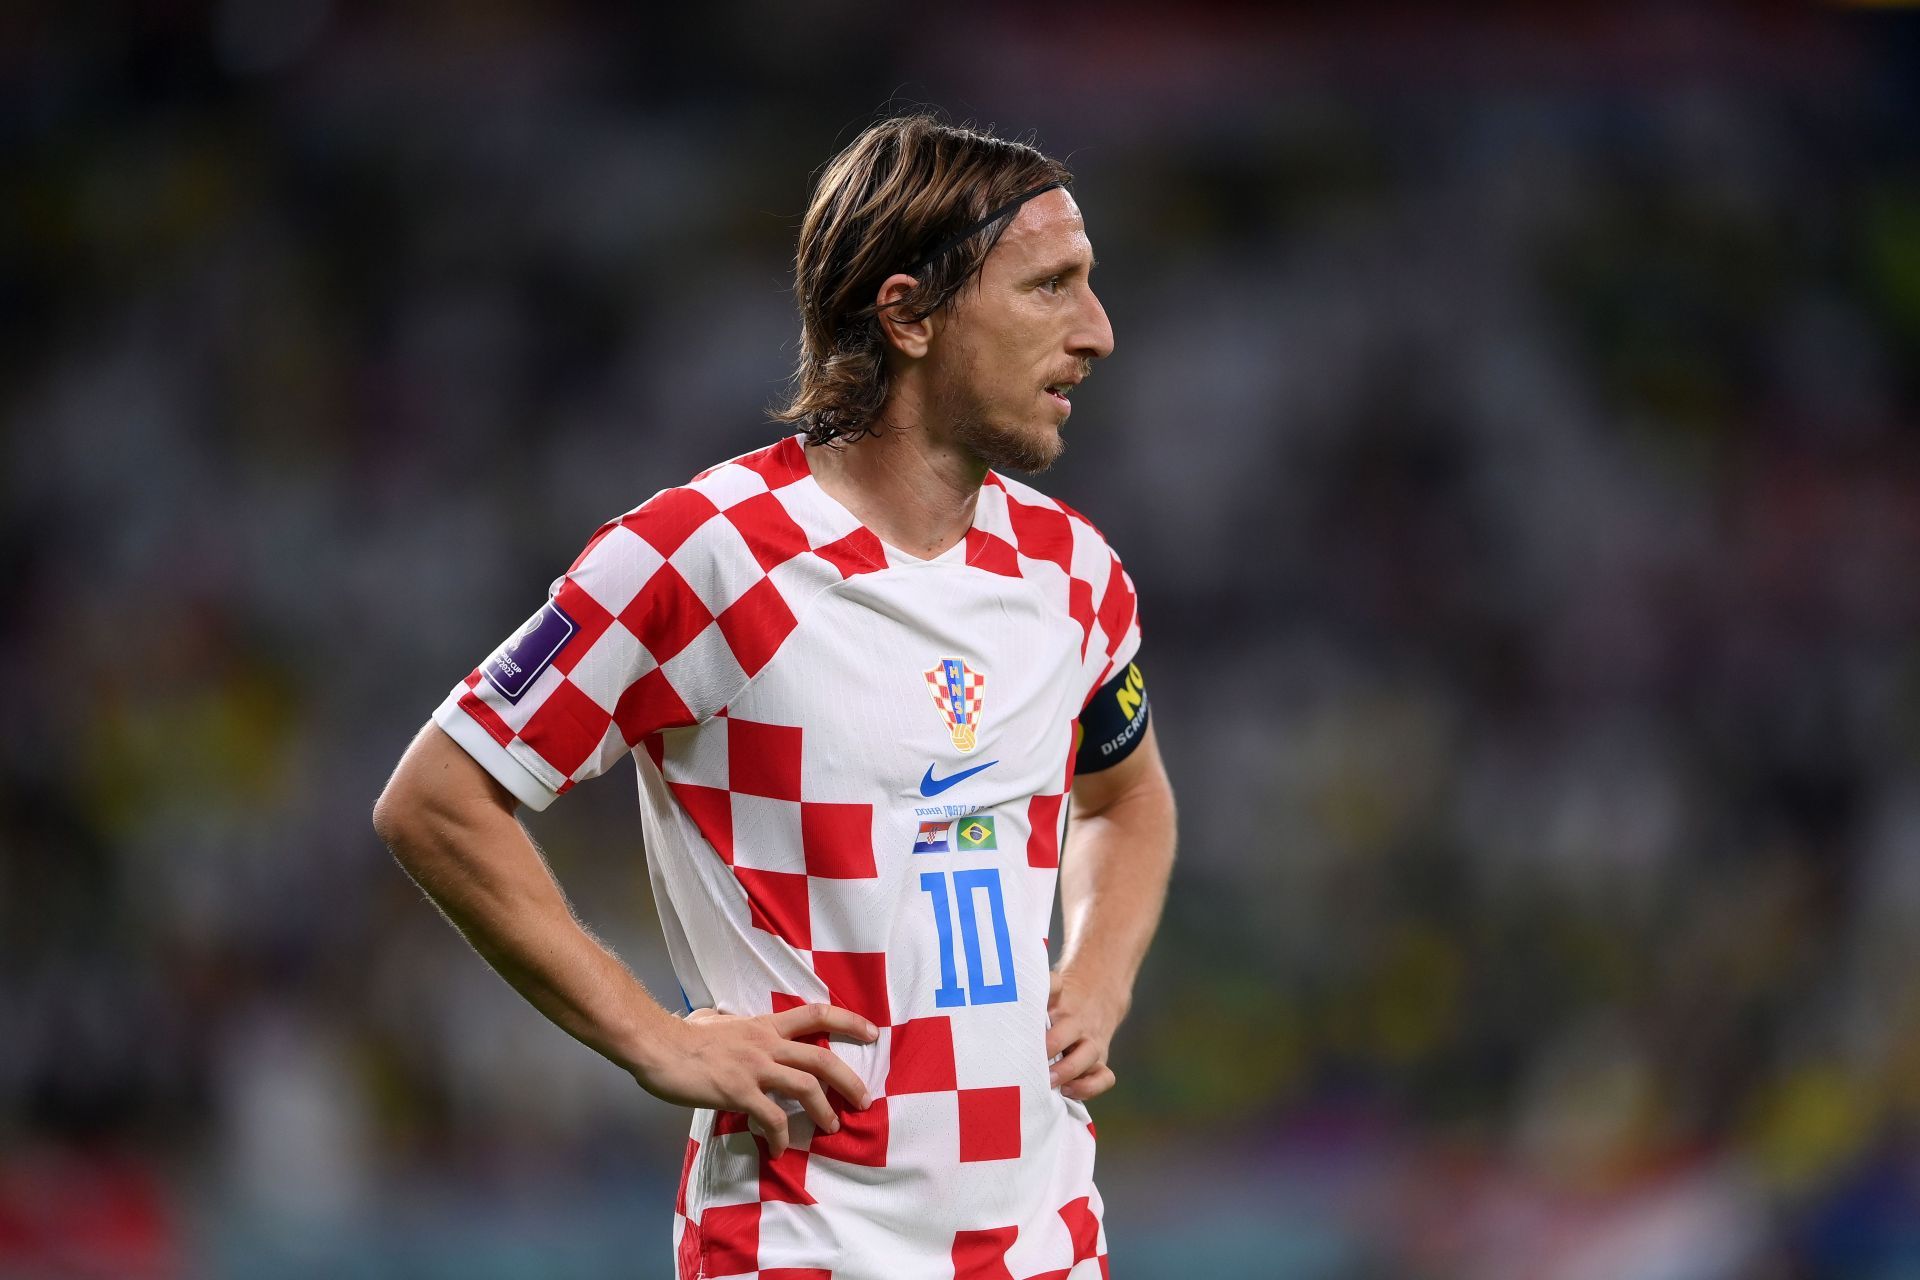 Luka Modric continues to go strong with club and country.